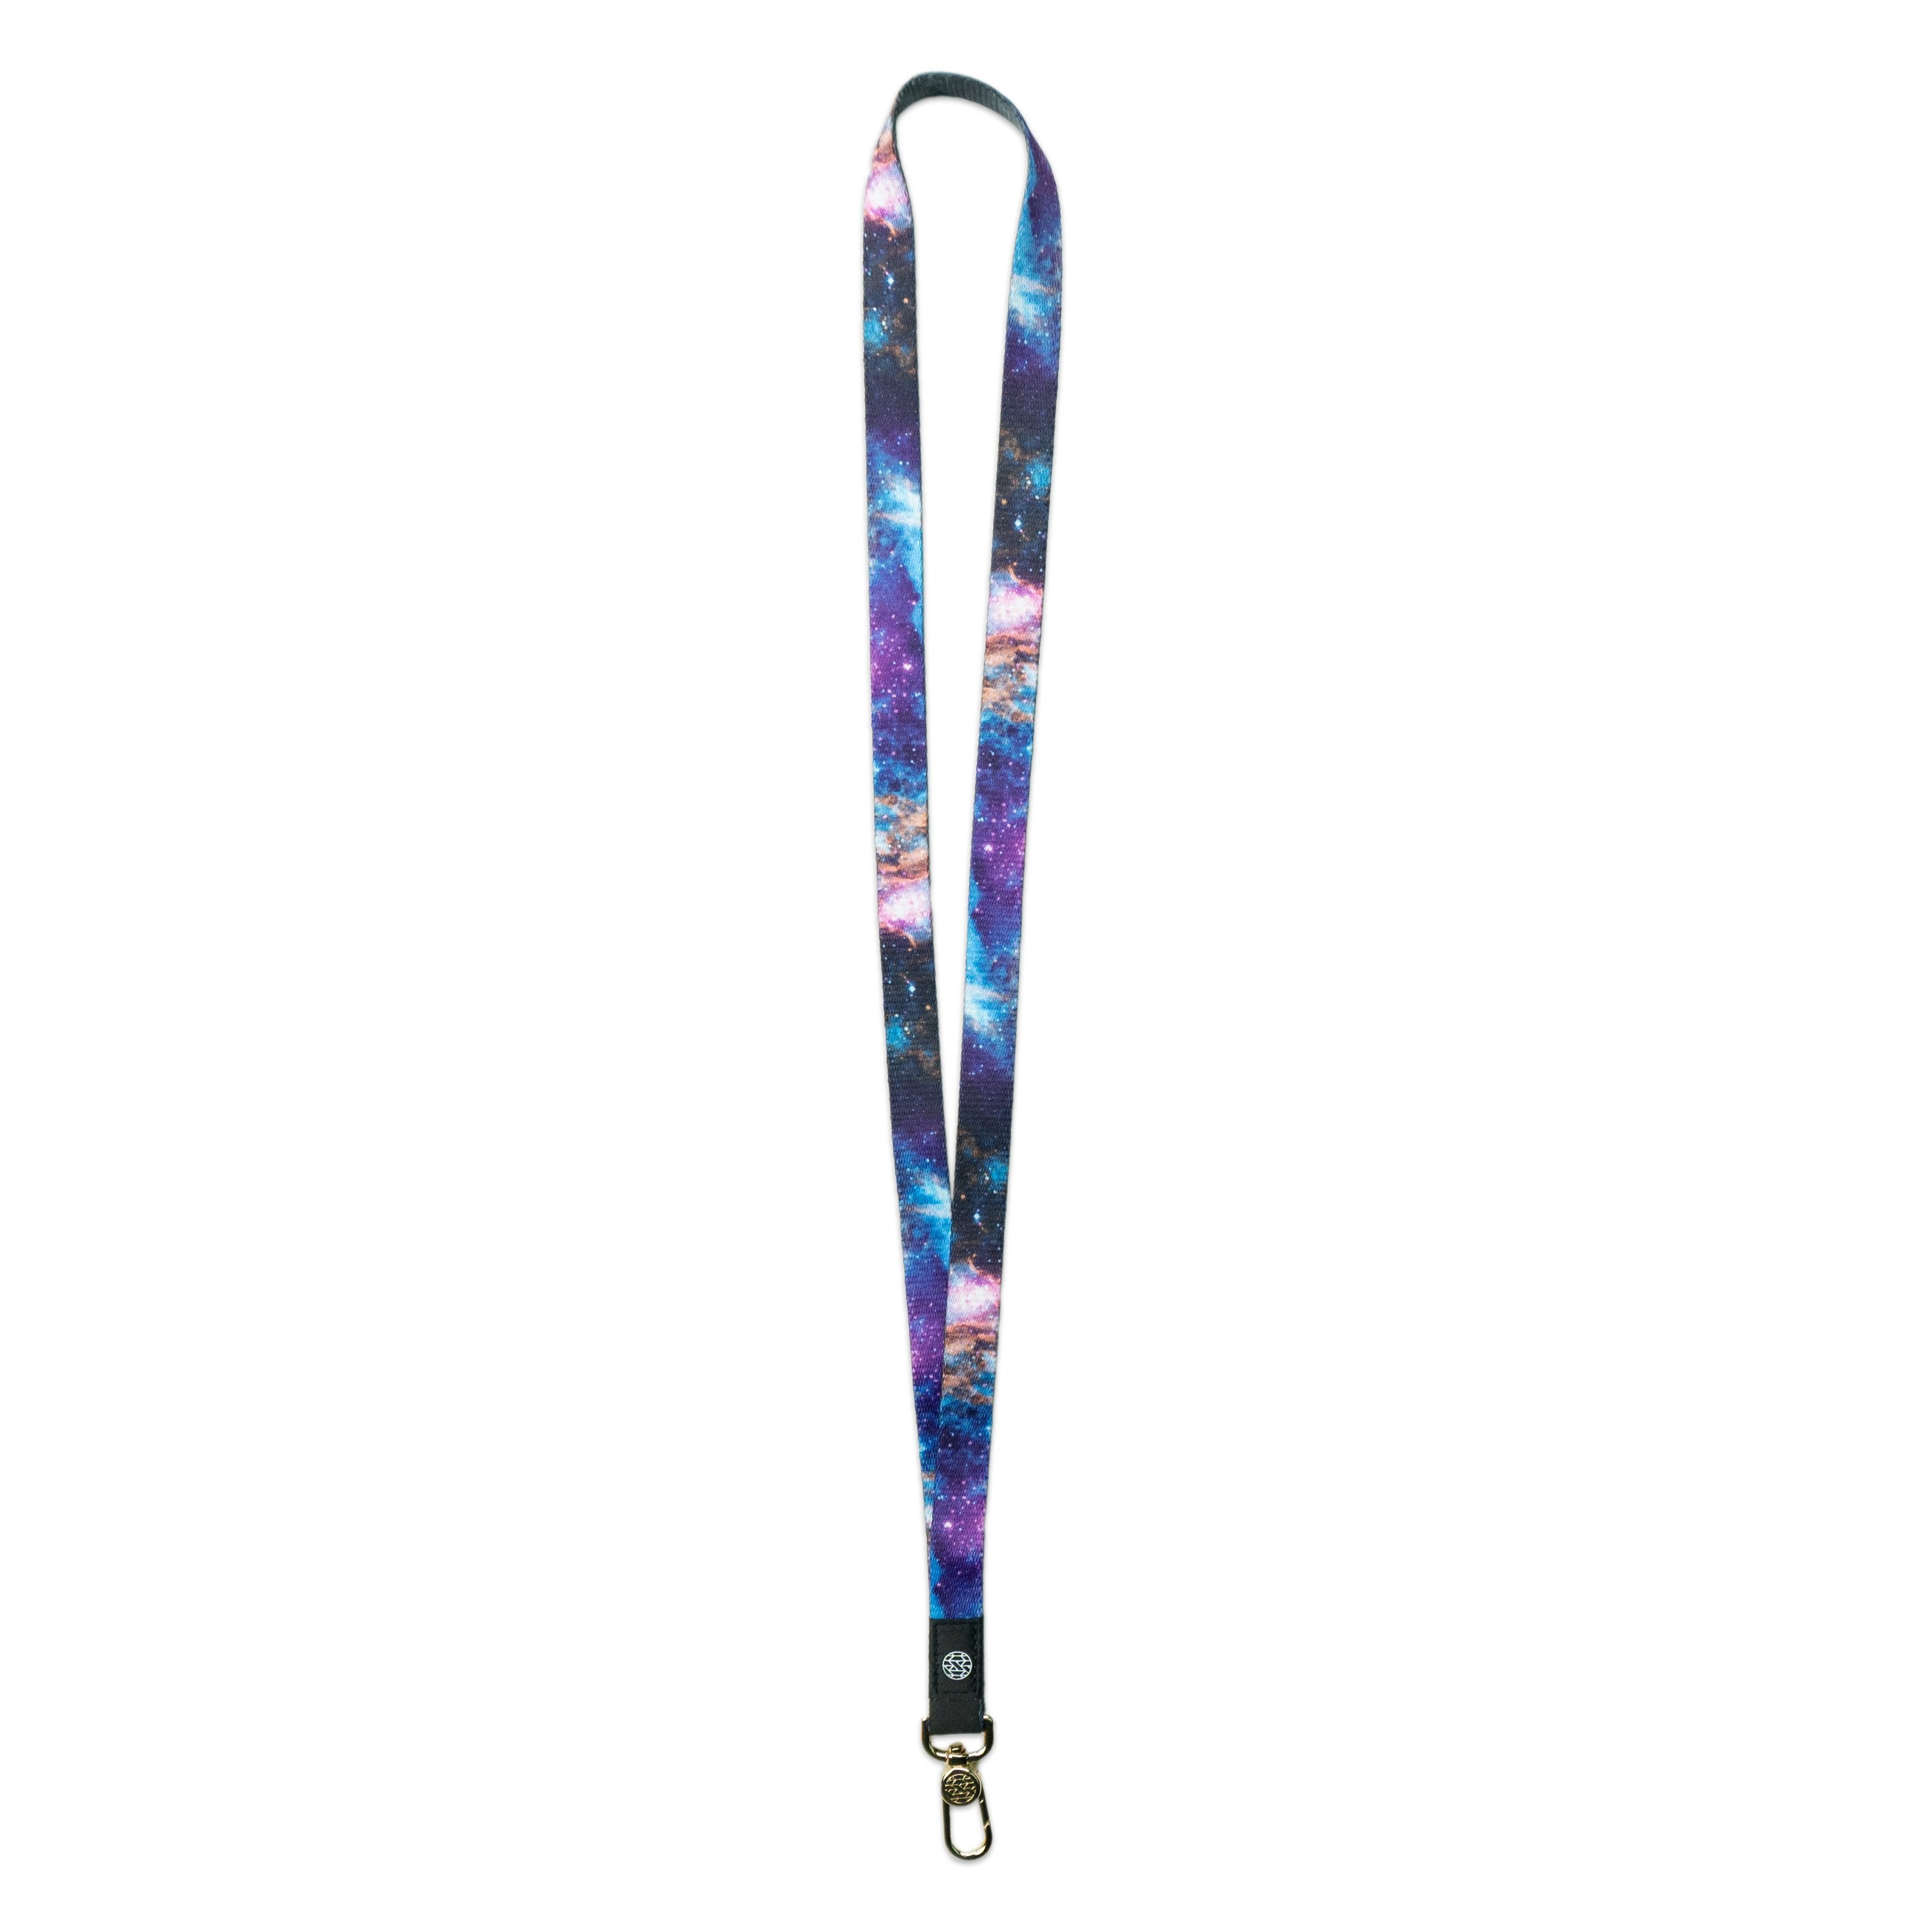 A product image of a ZOX lanyard showing the front of the design with a black colored metal clip. The lanyard is called Fighter and the design is an image of a nebula in space that is a mix of purple hues as well as some blue and pink colors mixed in.